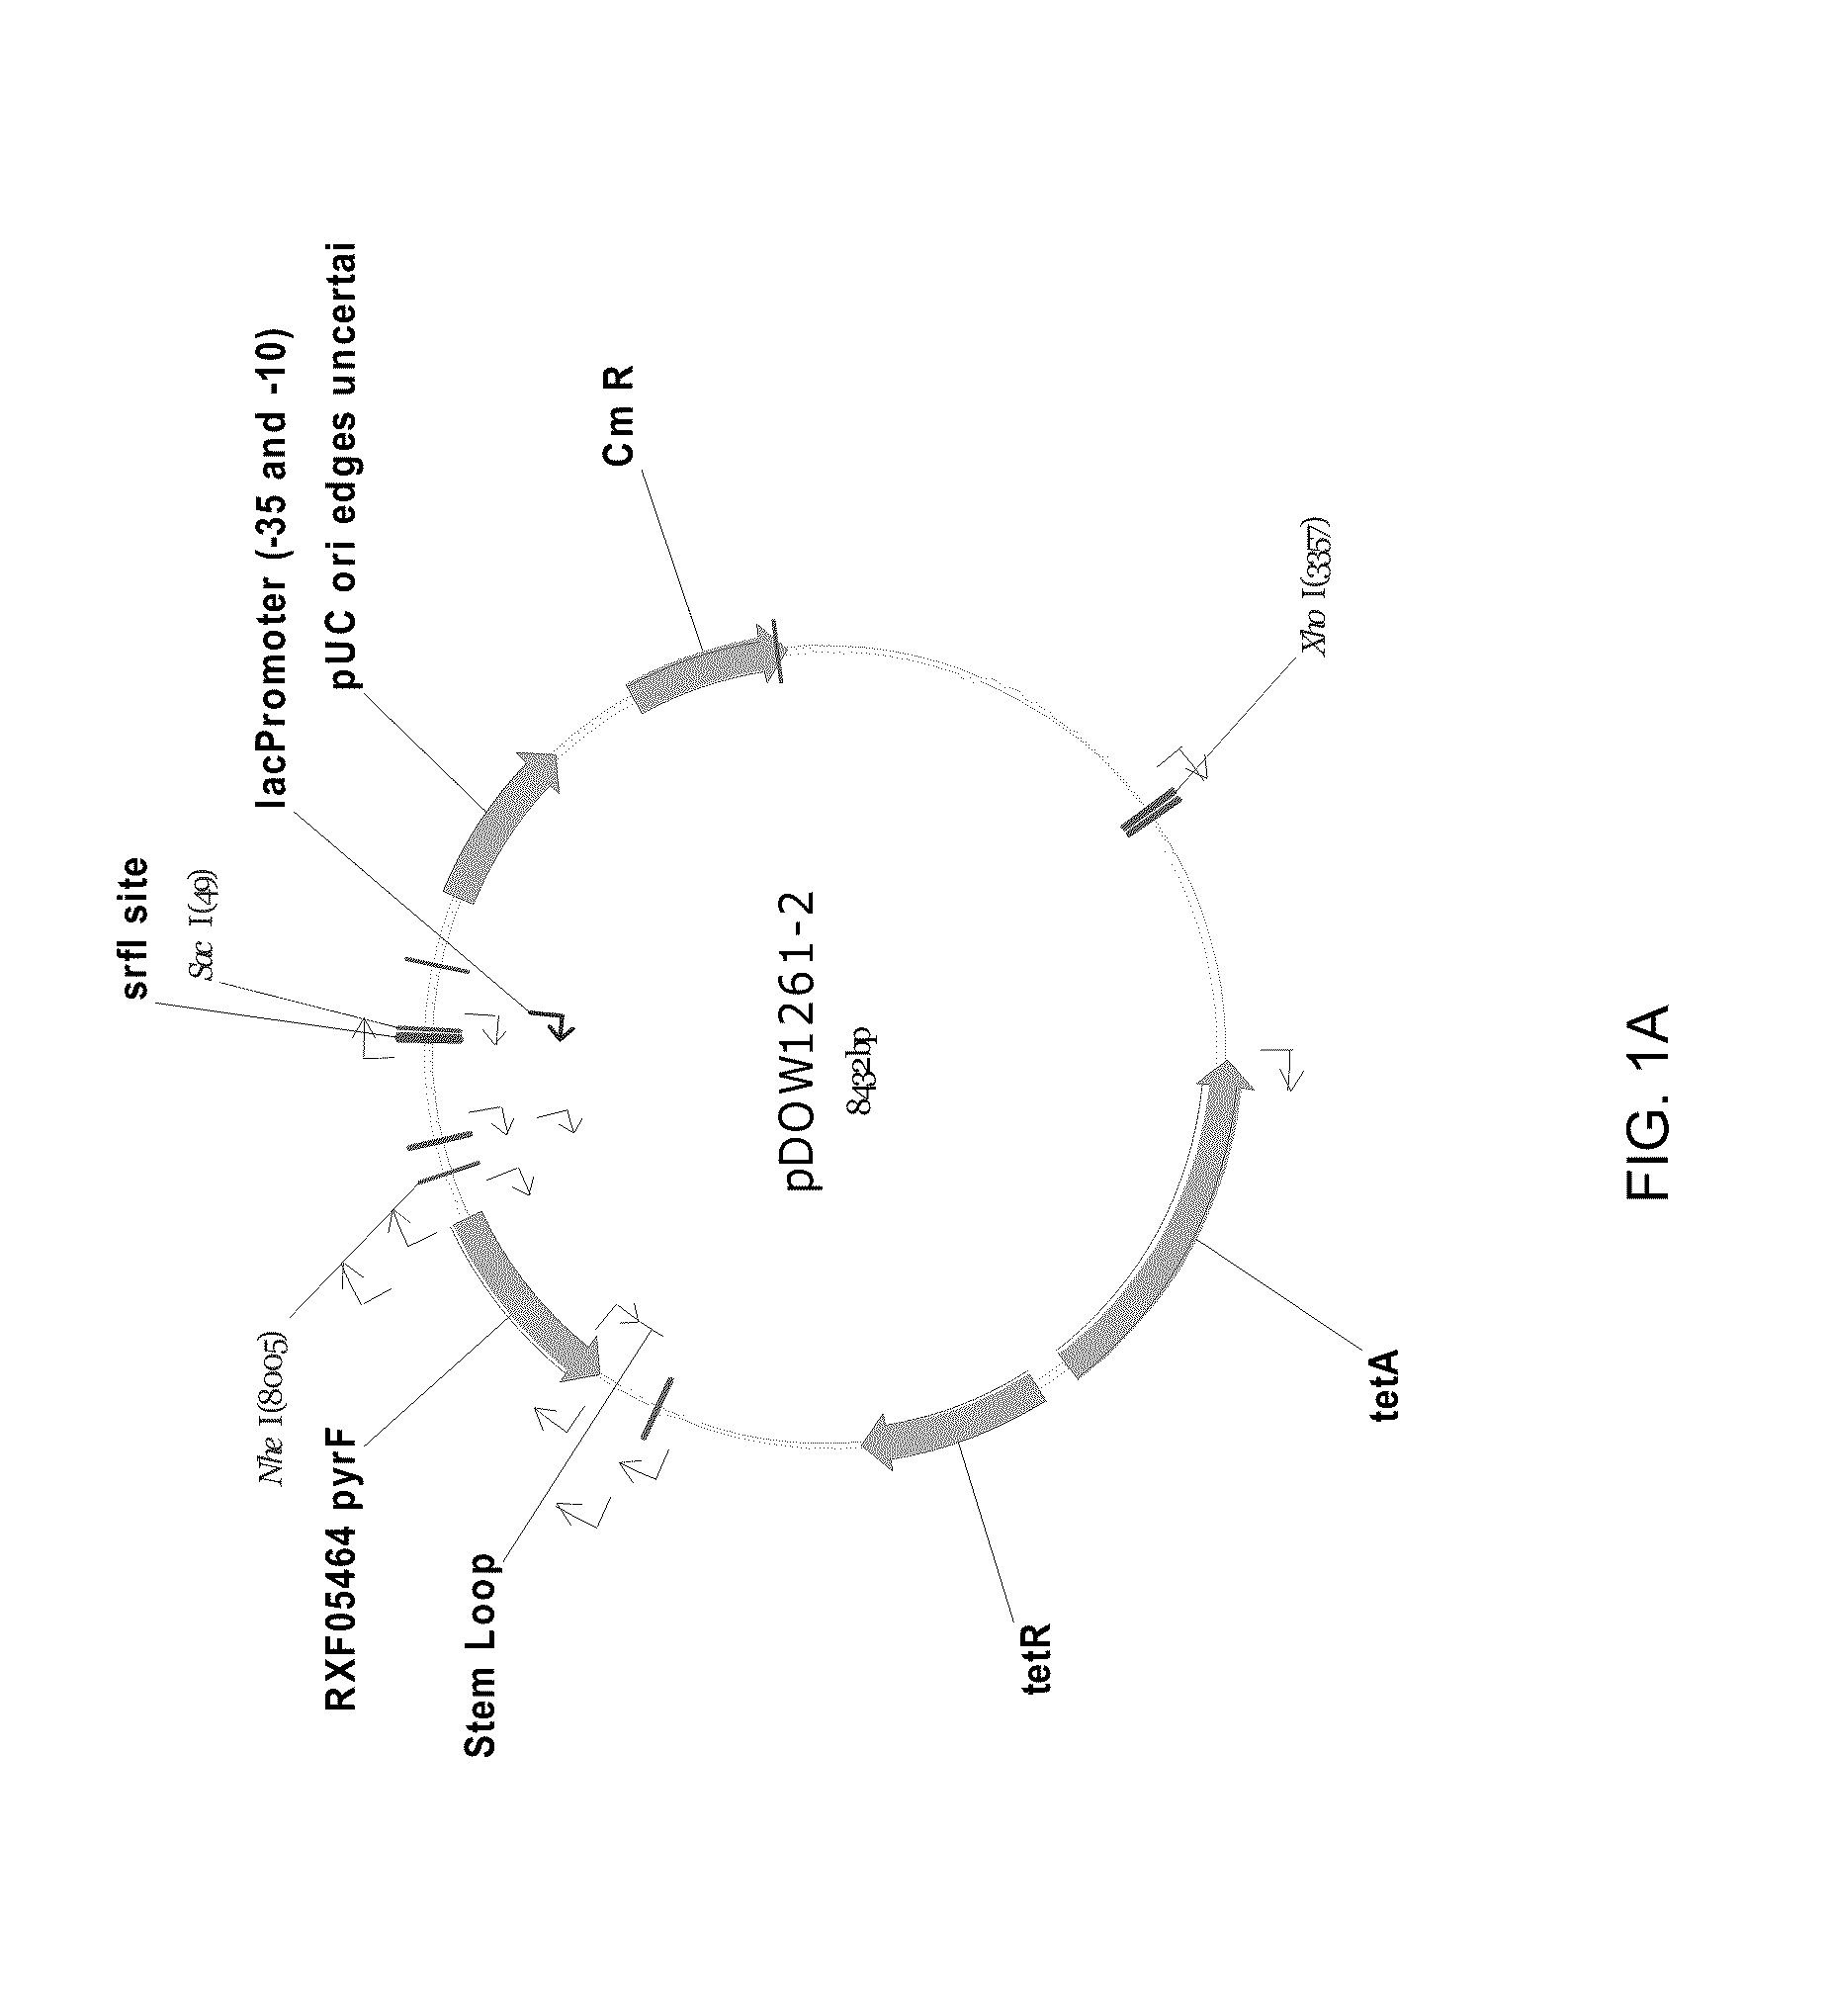 Method for Rapidly Screening Microbial Hosts to Identify Certain Strains with Improved Yield and/or Quality in the Expression of Heterologous Proteins